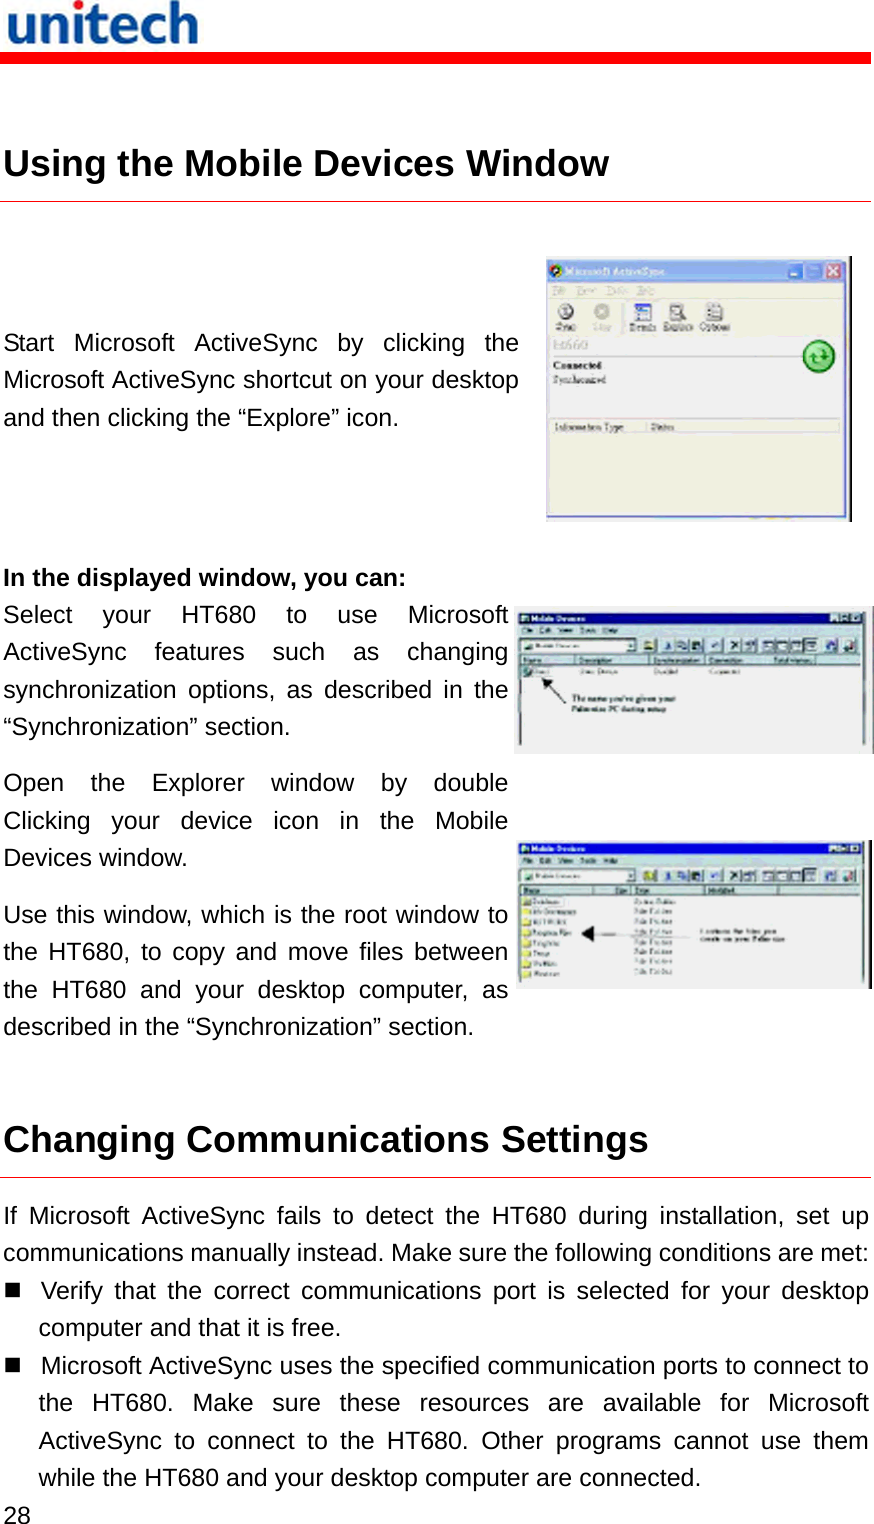   28   Using the Mobile Devices Window  Start Microsoft ActiveSync by clicking the Microsoft ActiveSync shortcut on your desktop and then clicking the “Explore” icon.  In the displayed window, you can: Select your HT680 to use Microsoft ActiveSync features such as changing synchronization options, as described in the “Synchronization” section. Open the Explorer window by double Clicking your device icon in the Mobile Devices window. Use this window, which is the root window to the HT680, to copy and move files between the HT680 and your desktop computer, as described in the “Synchronization” section.  Changing Communications Settings If Microsoft ActiveSync fails to detect the HT680 during installation, set up communications manually instead. Make sure the following conditions are met:  Verify that the correct communications port is selected for your desktop computer and that it is free.  Microsoft ActiveSync uses the specified communication ports to connect to the HT680. Make sure these resources are available for Microsoft ActiveSync to connect to the HT680. Other programs cannot use them while the HT680 and your desktop computer are connected. 